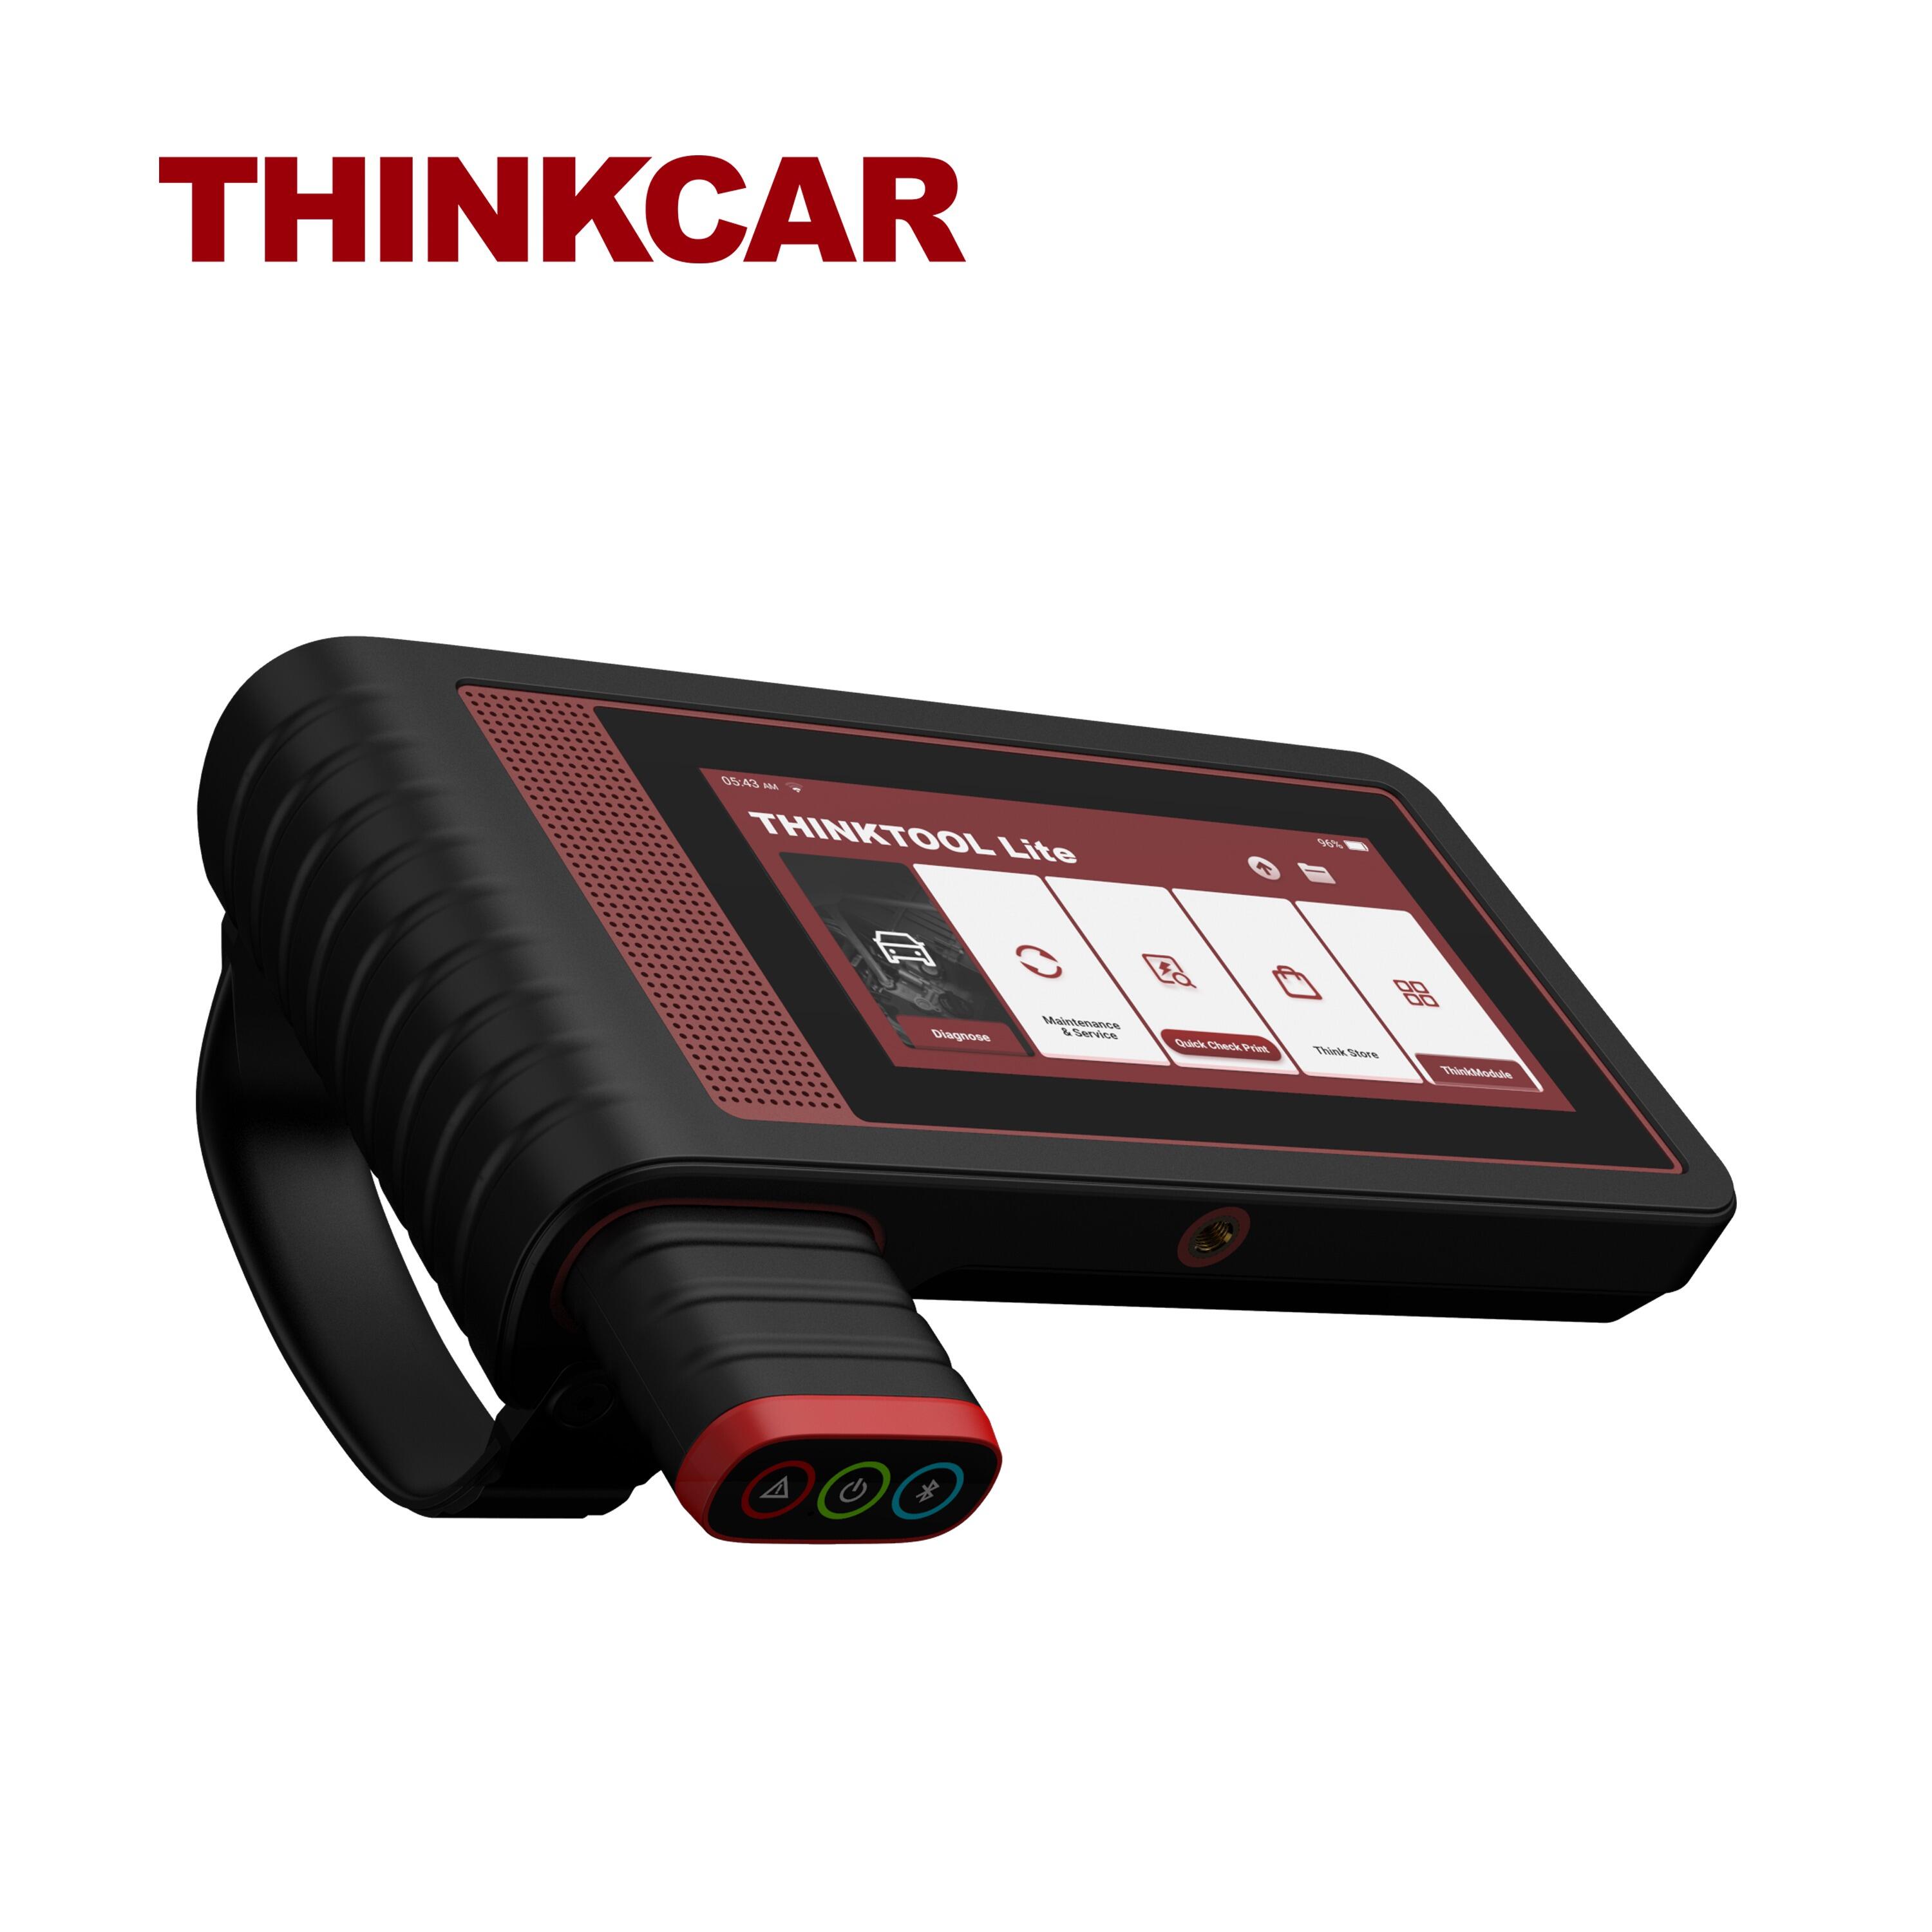 THINKCAR Portable LED Work Light for Module Dock OBD2 Scanner Tool Accessory - THINKWORKLIGHT